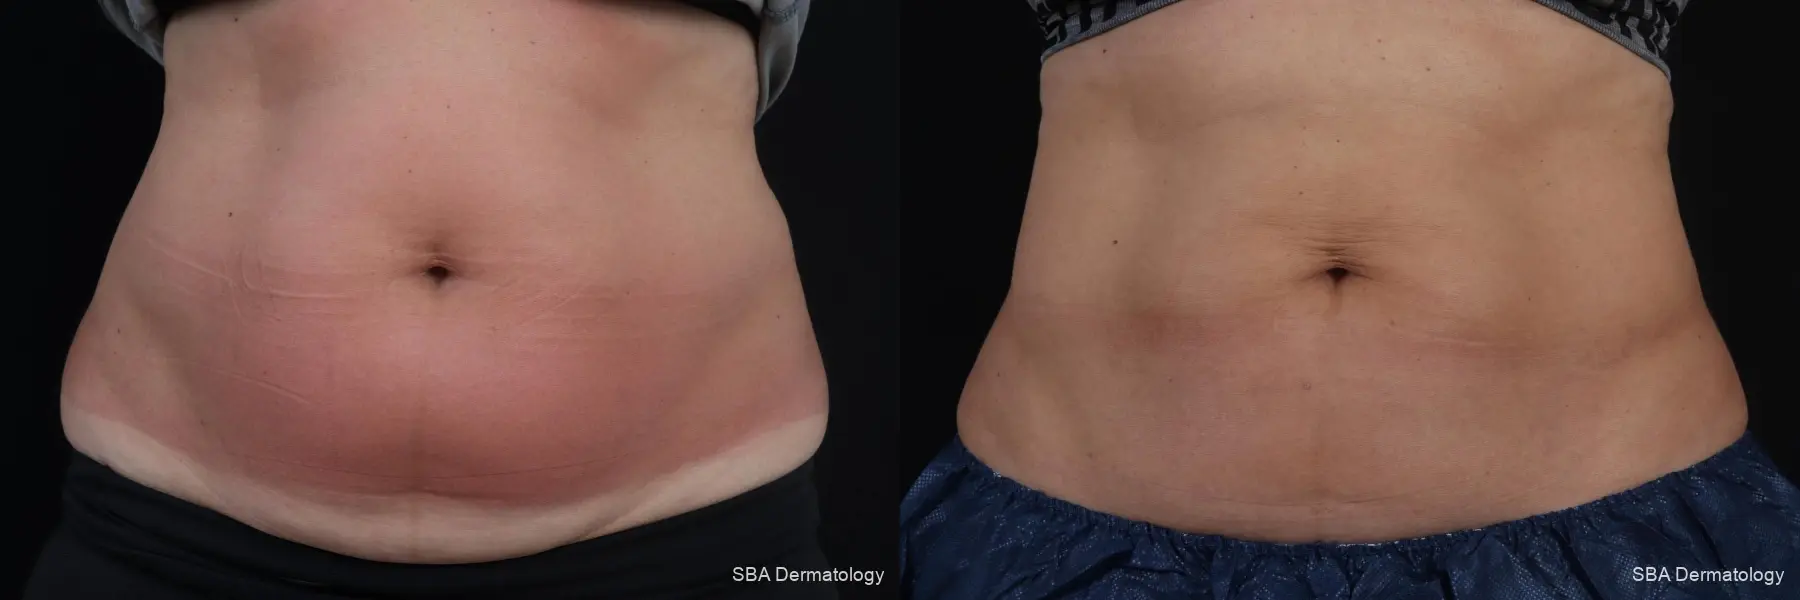 Coolsculpting: Patient 6 - Before and After  